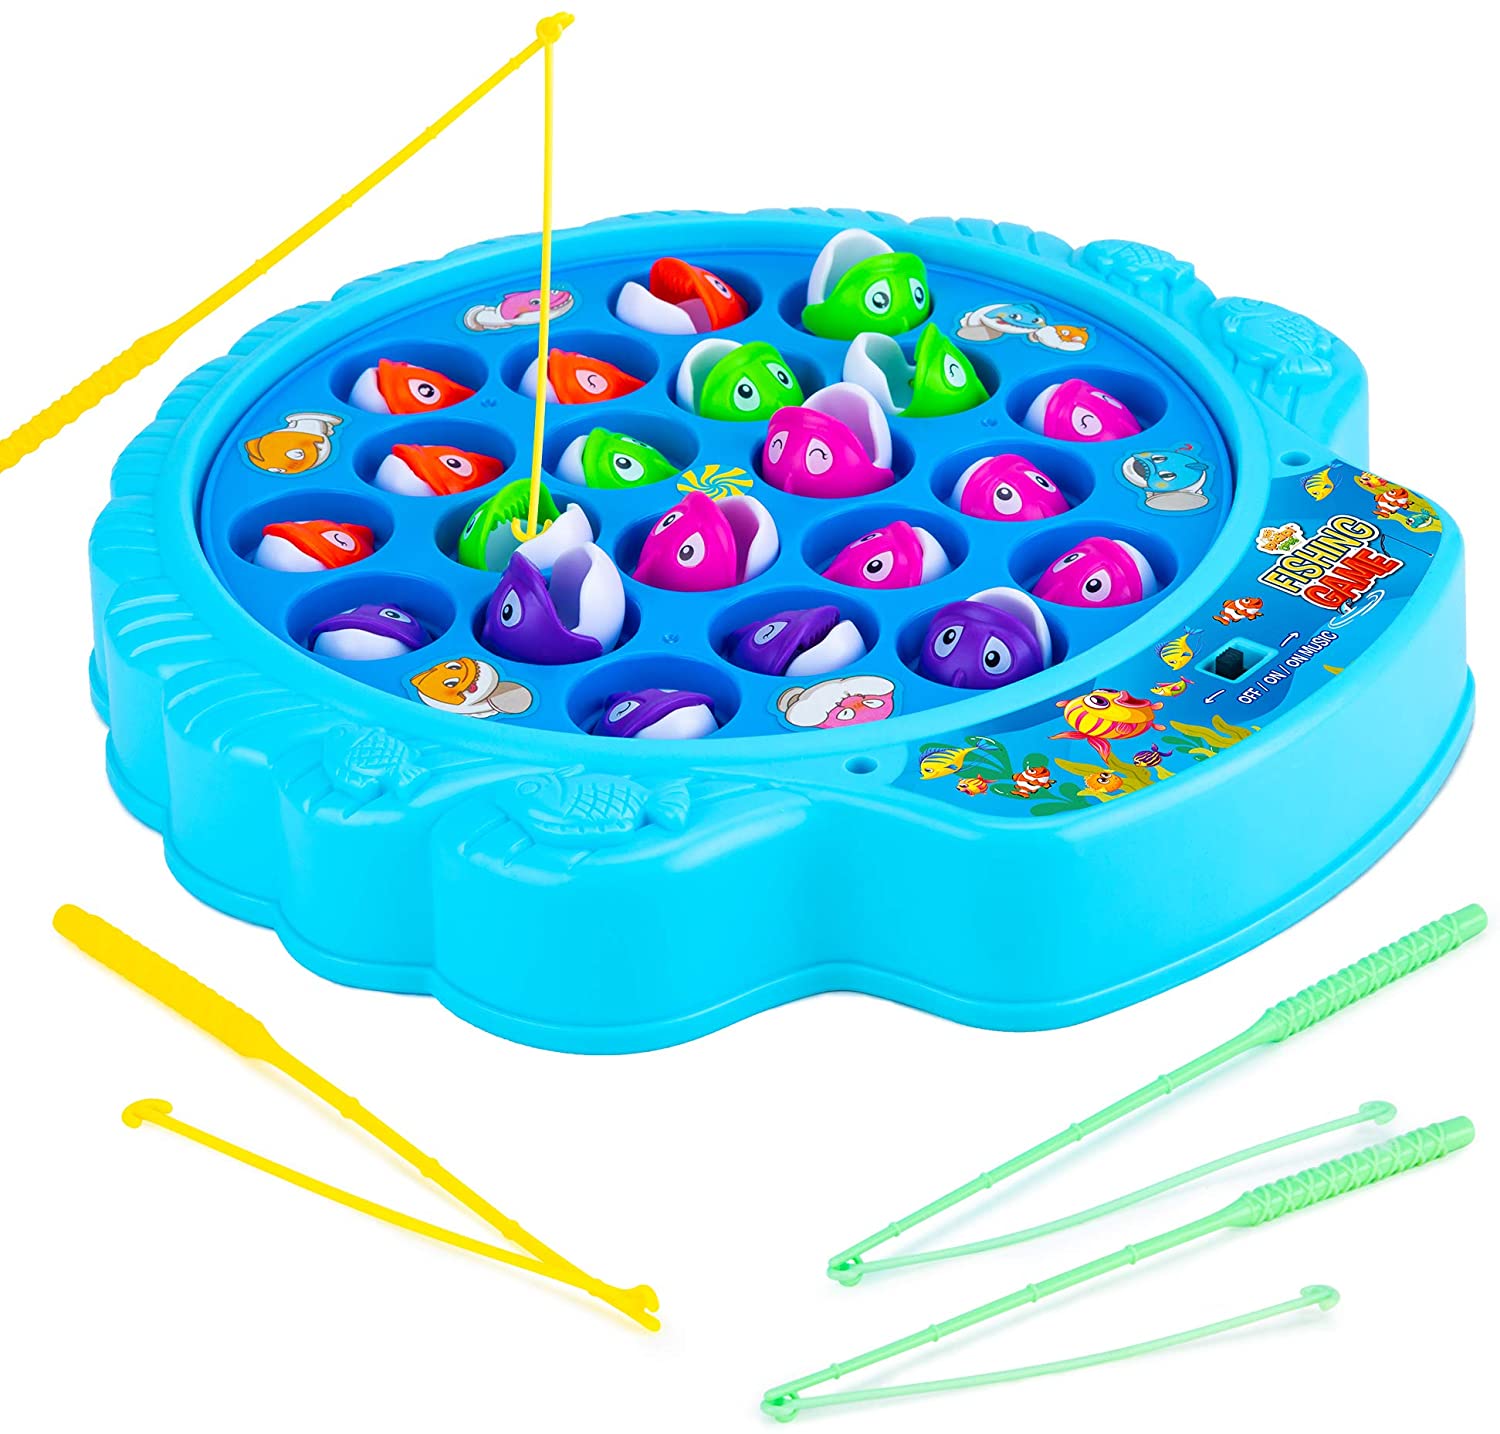 DITOYS Fishing Game Play Set | Family Games for Kids 4 and Up | Ideal Gifts for Kids | Fish Magenitic Game for Toddlers, Games in Spanish | 21 Fish